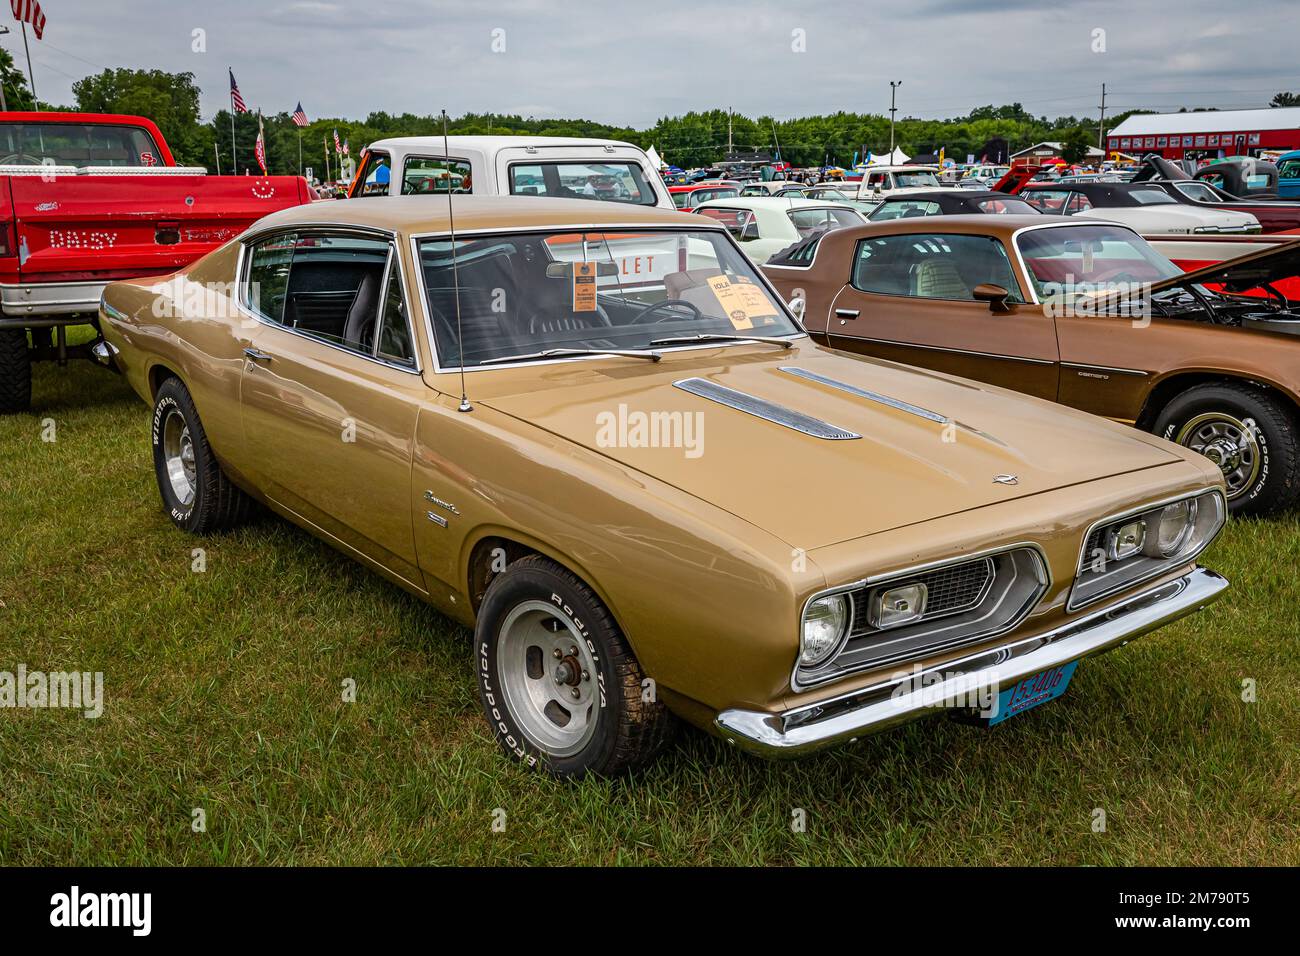 Iola, WI - July 07, 2022: High perspective front corner view of a 1967 Plymouth Barracuda Fastback at a local car show. Stock Photo